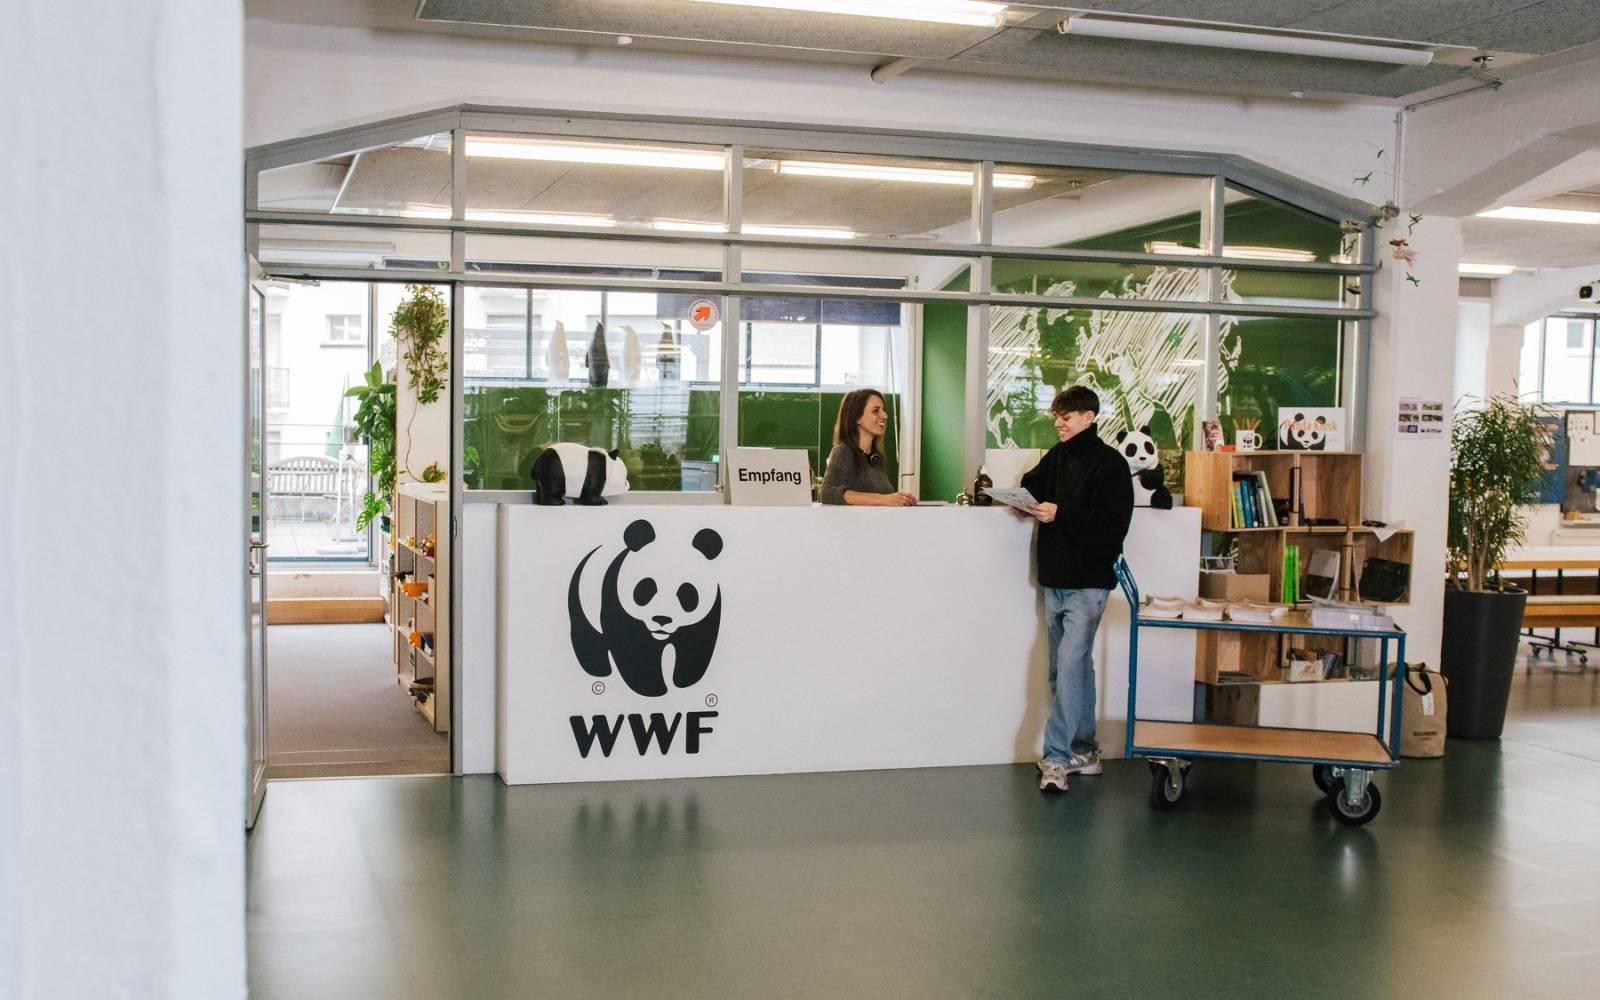 co-workers talking at WWF-office reception desk